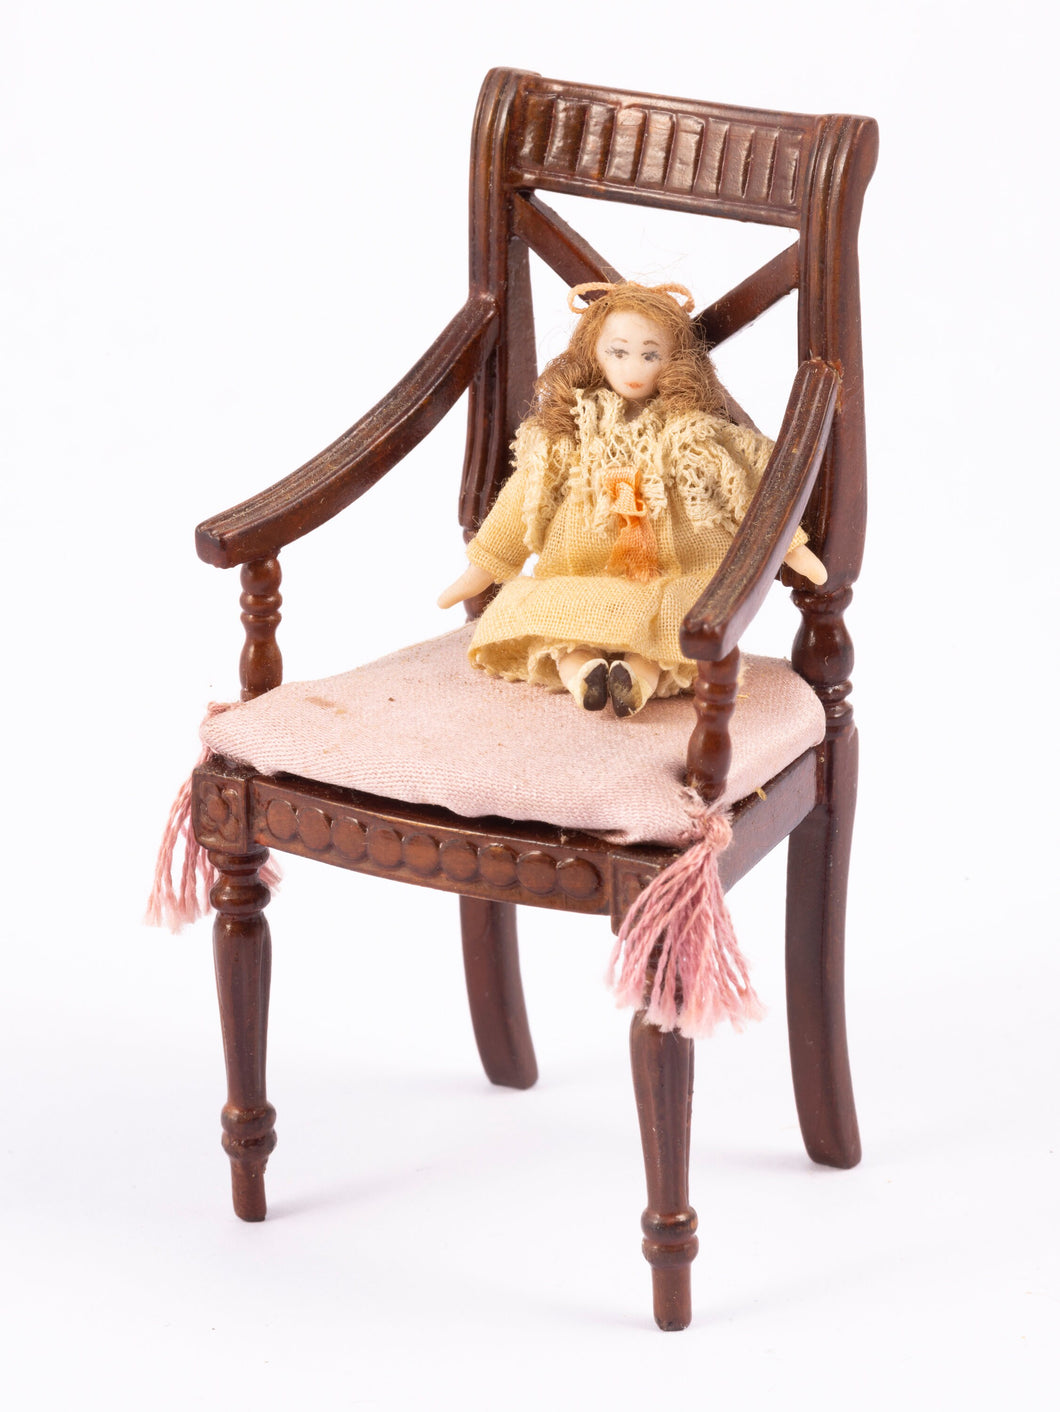 Artisan Doll on Wooden Chair